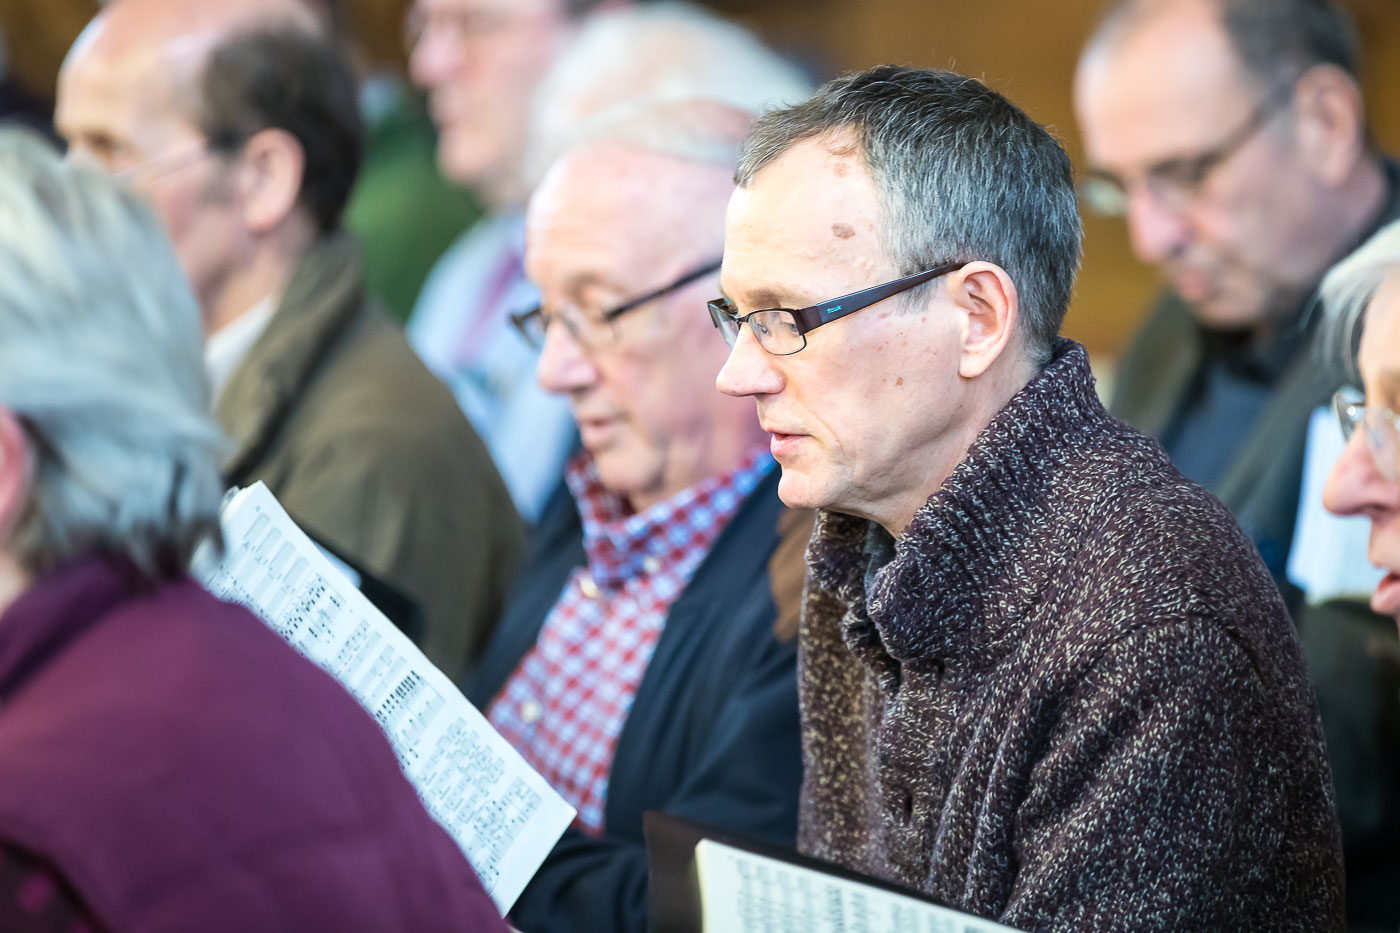 Come and Sing rehearsal, March 2018